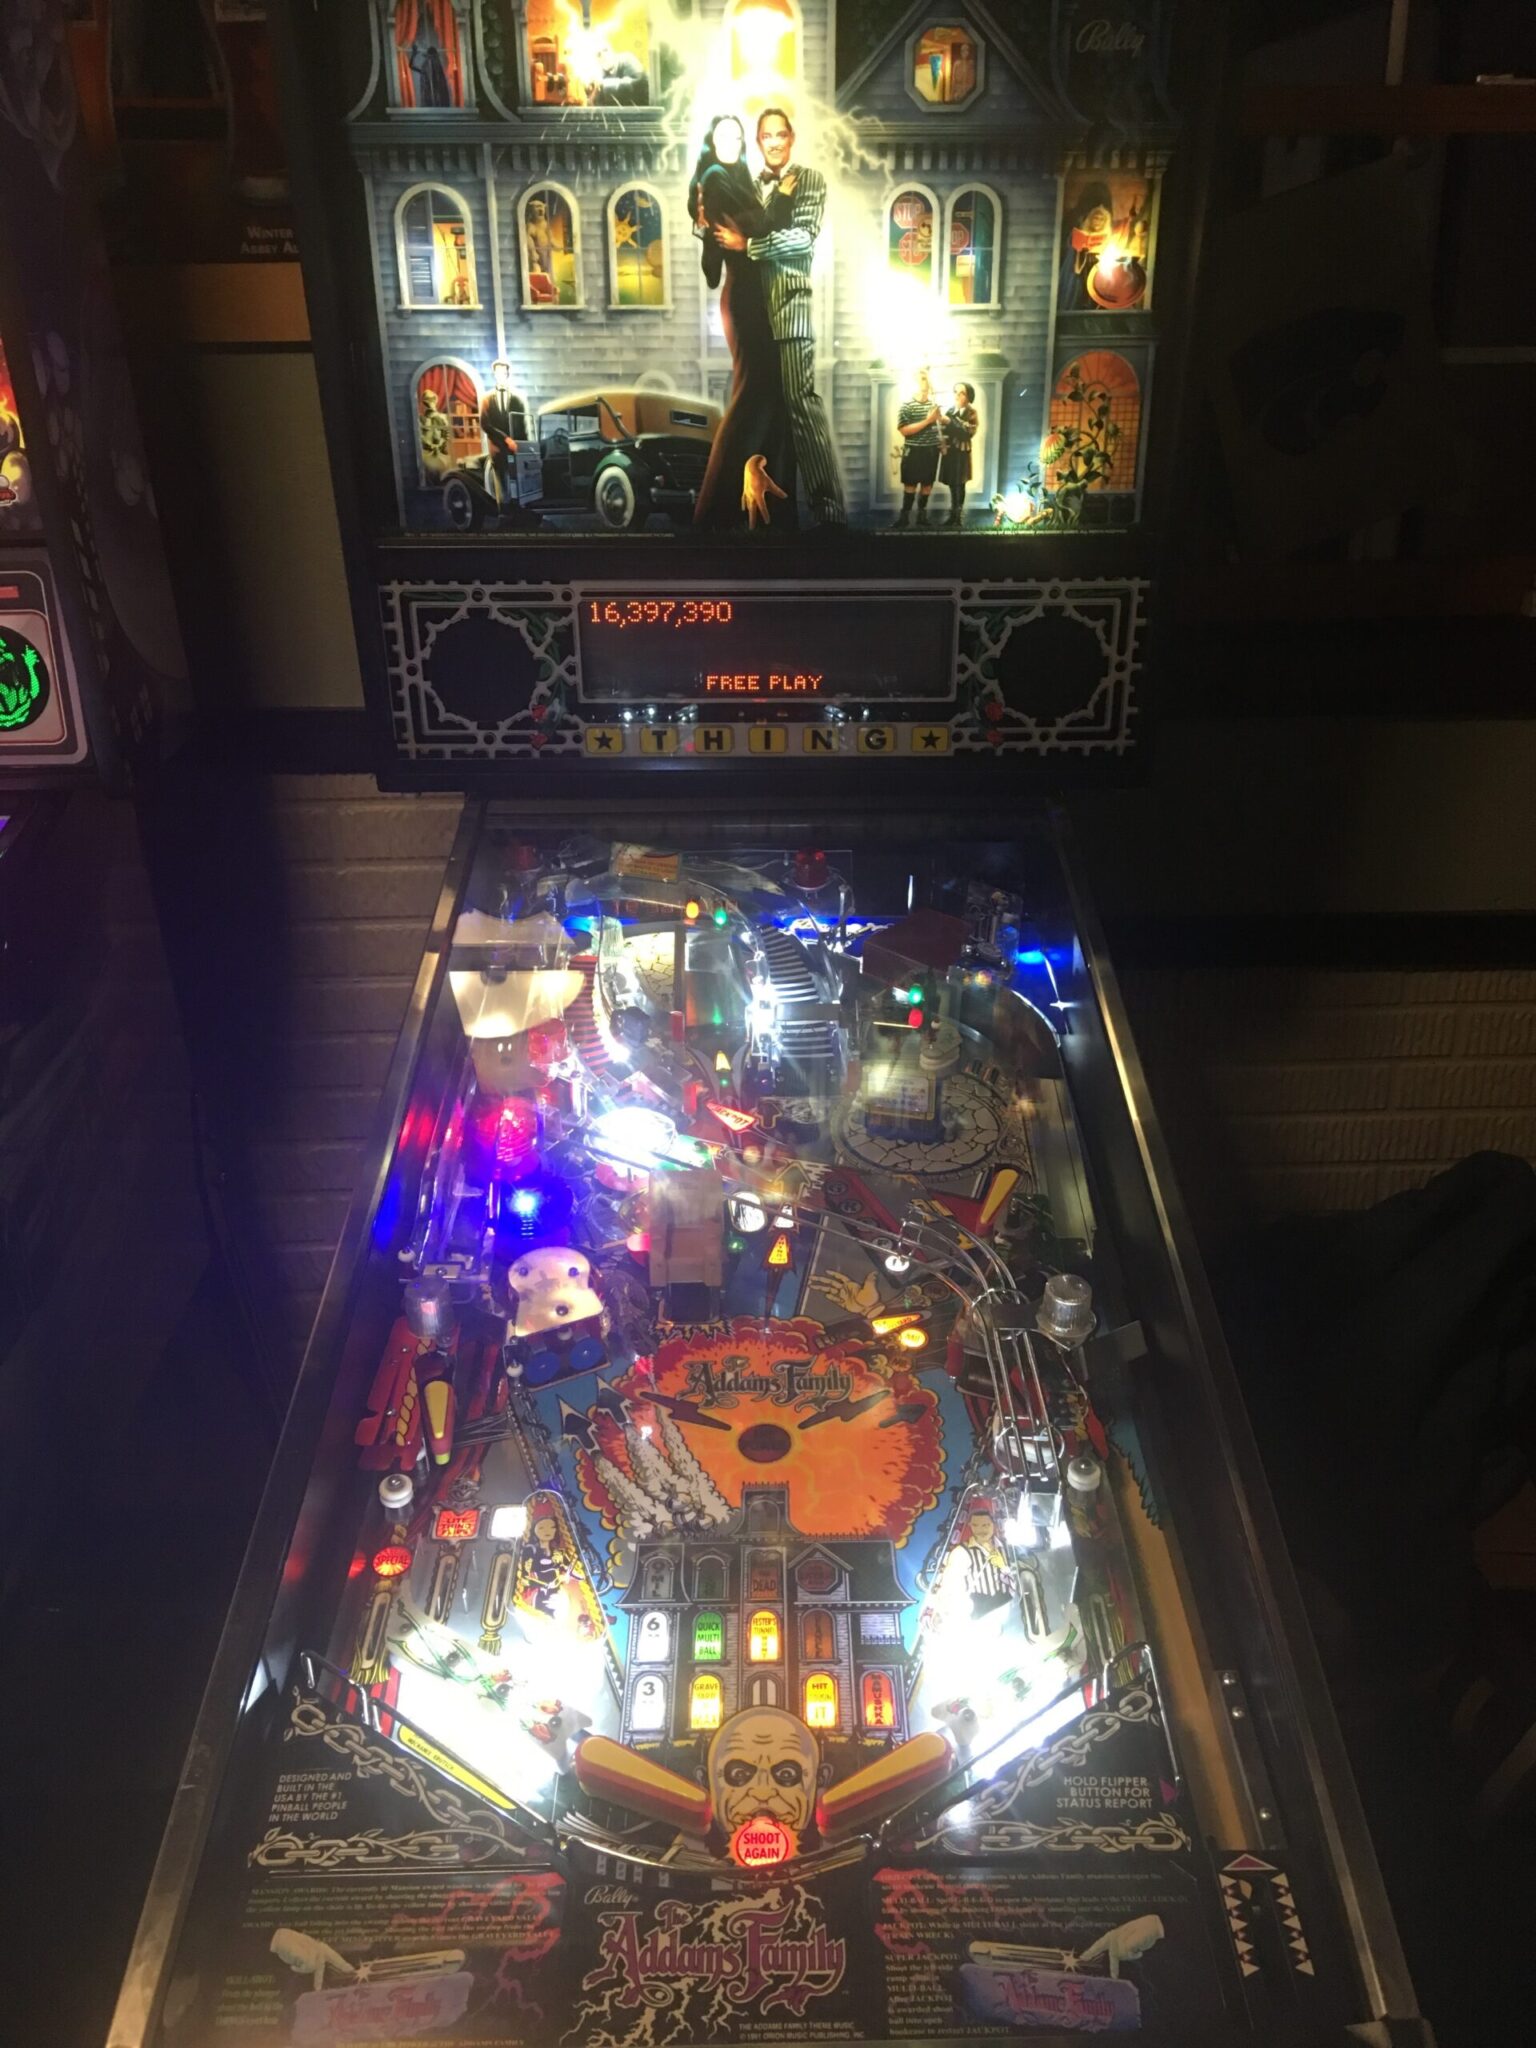 addams family gold pinball for sale